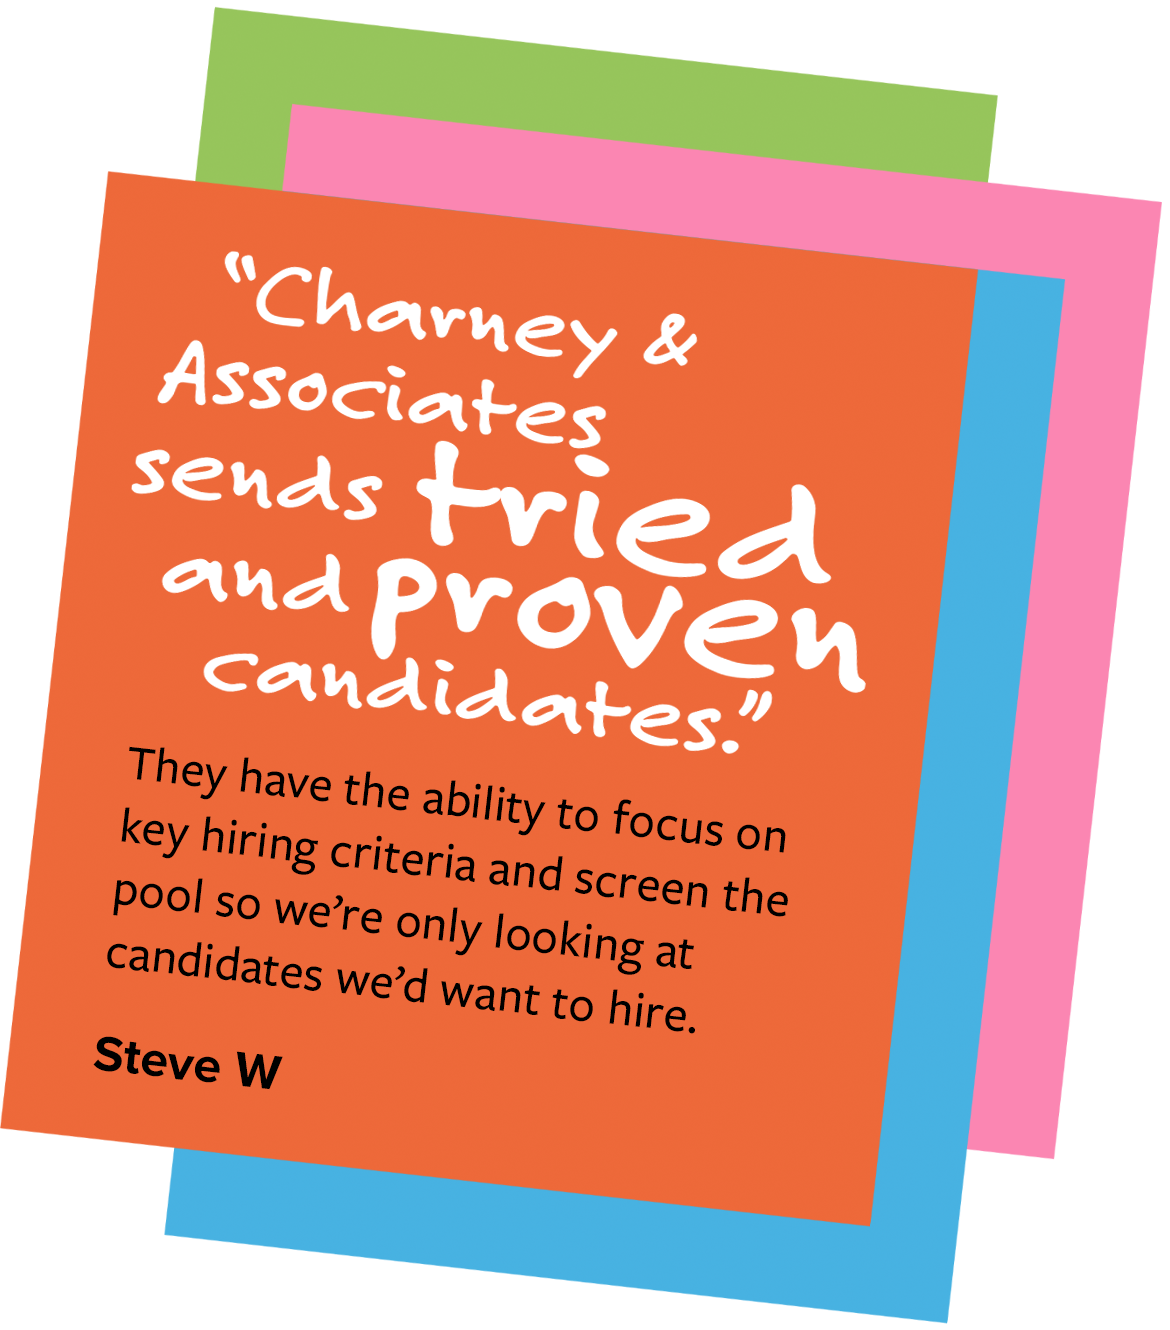 Charney & Associates sends tried and proven candidates.